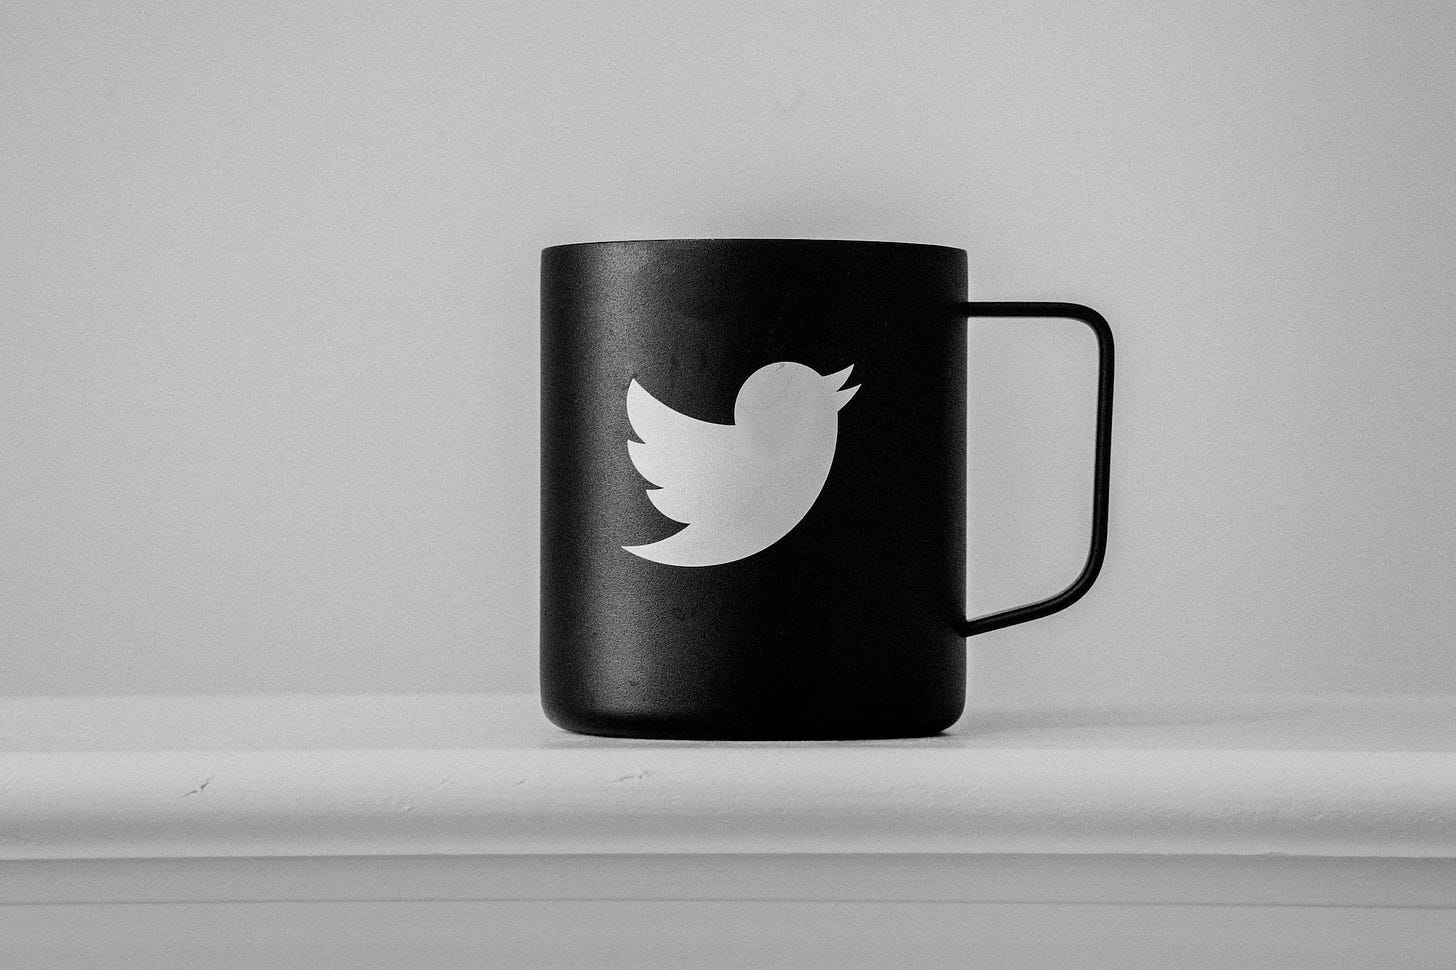 Twitter's coffee cup